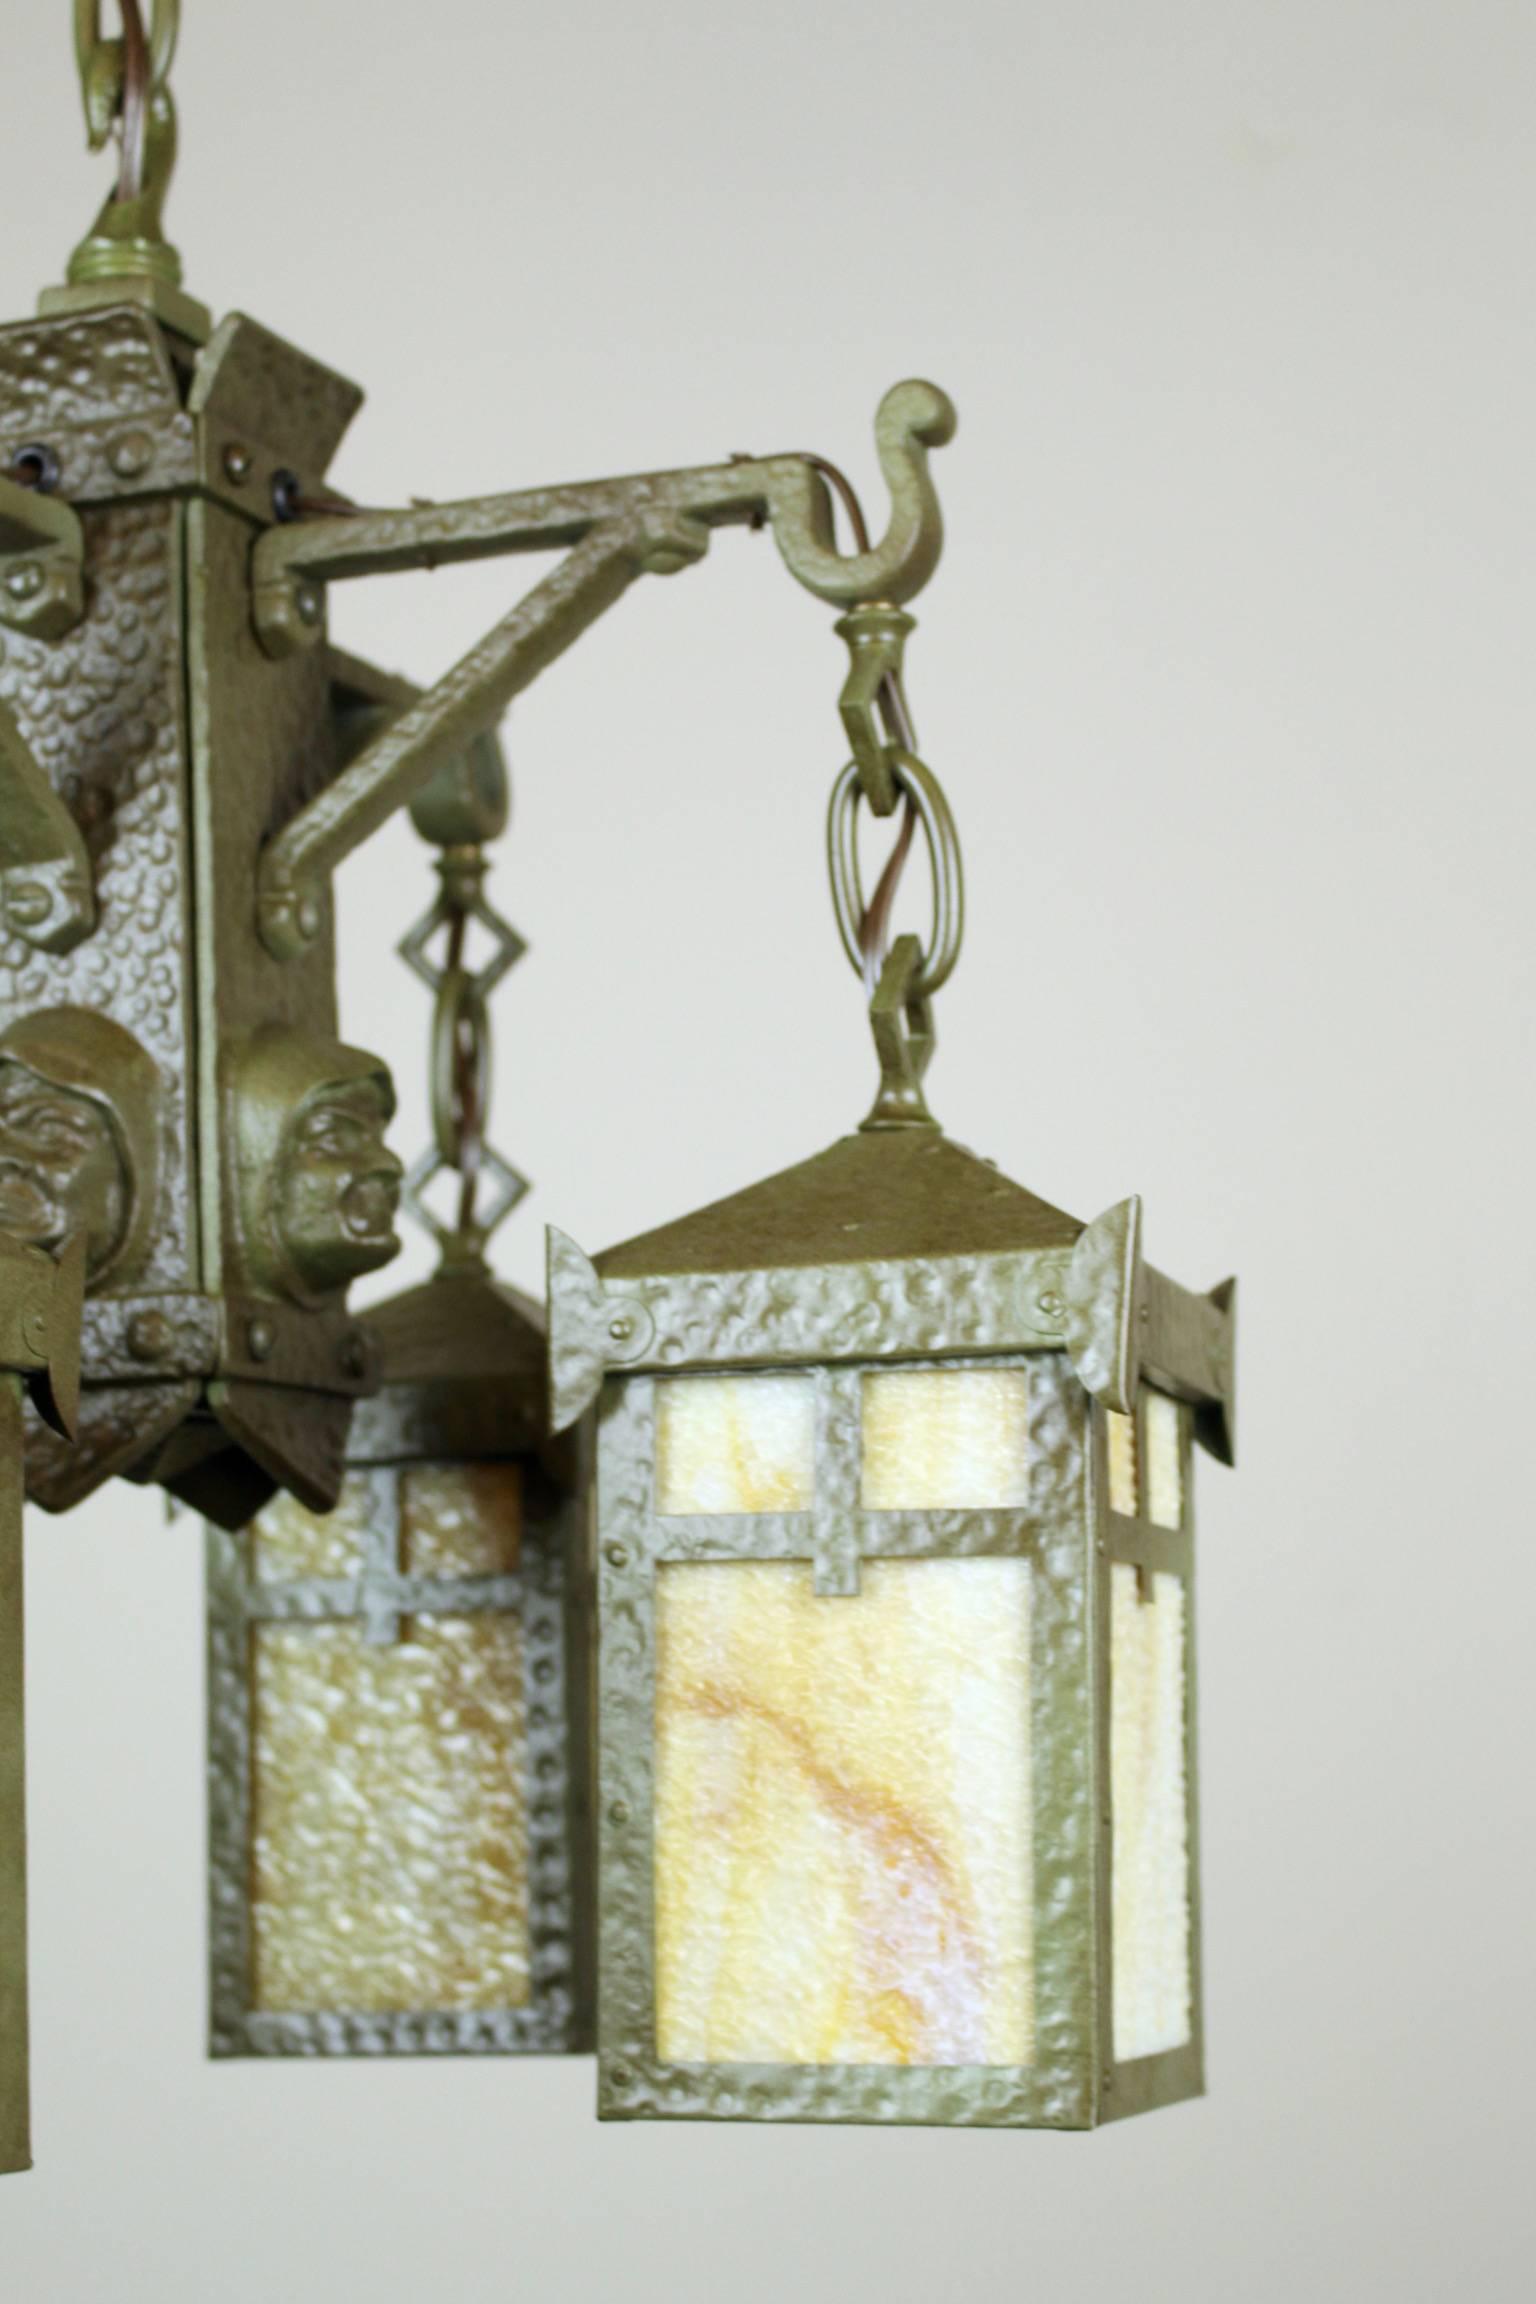 Circa 1906 Arts & Crafts four-light ‘Monk’ fixture attributed to Bradley & Hubbard.

Predominantly hand made with hammered cast iron body and lantern shades. An unusual design embodied in the original ‘Verdigris’ finish and fitted with period